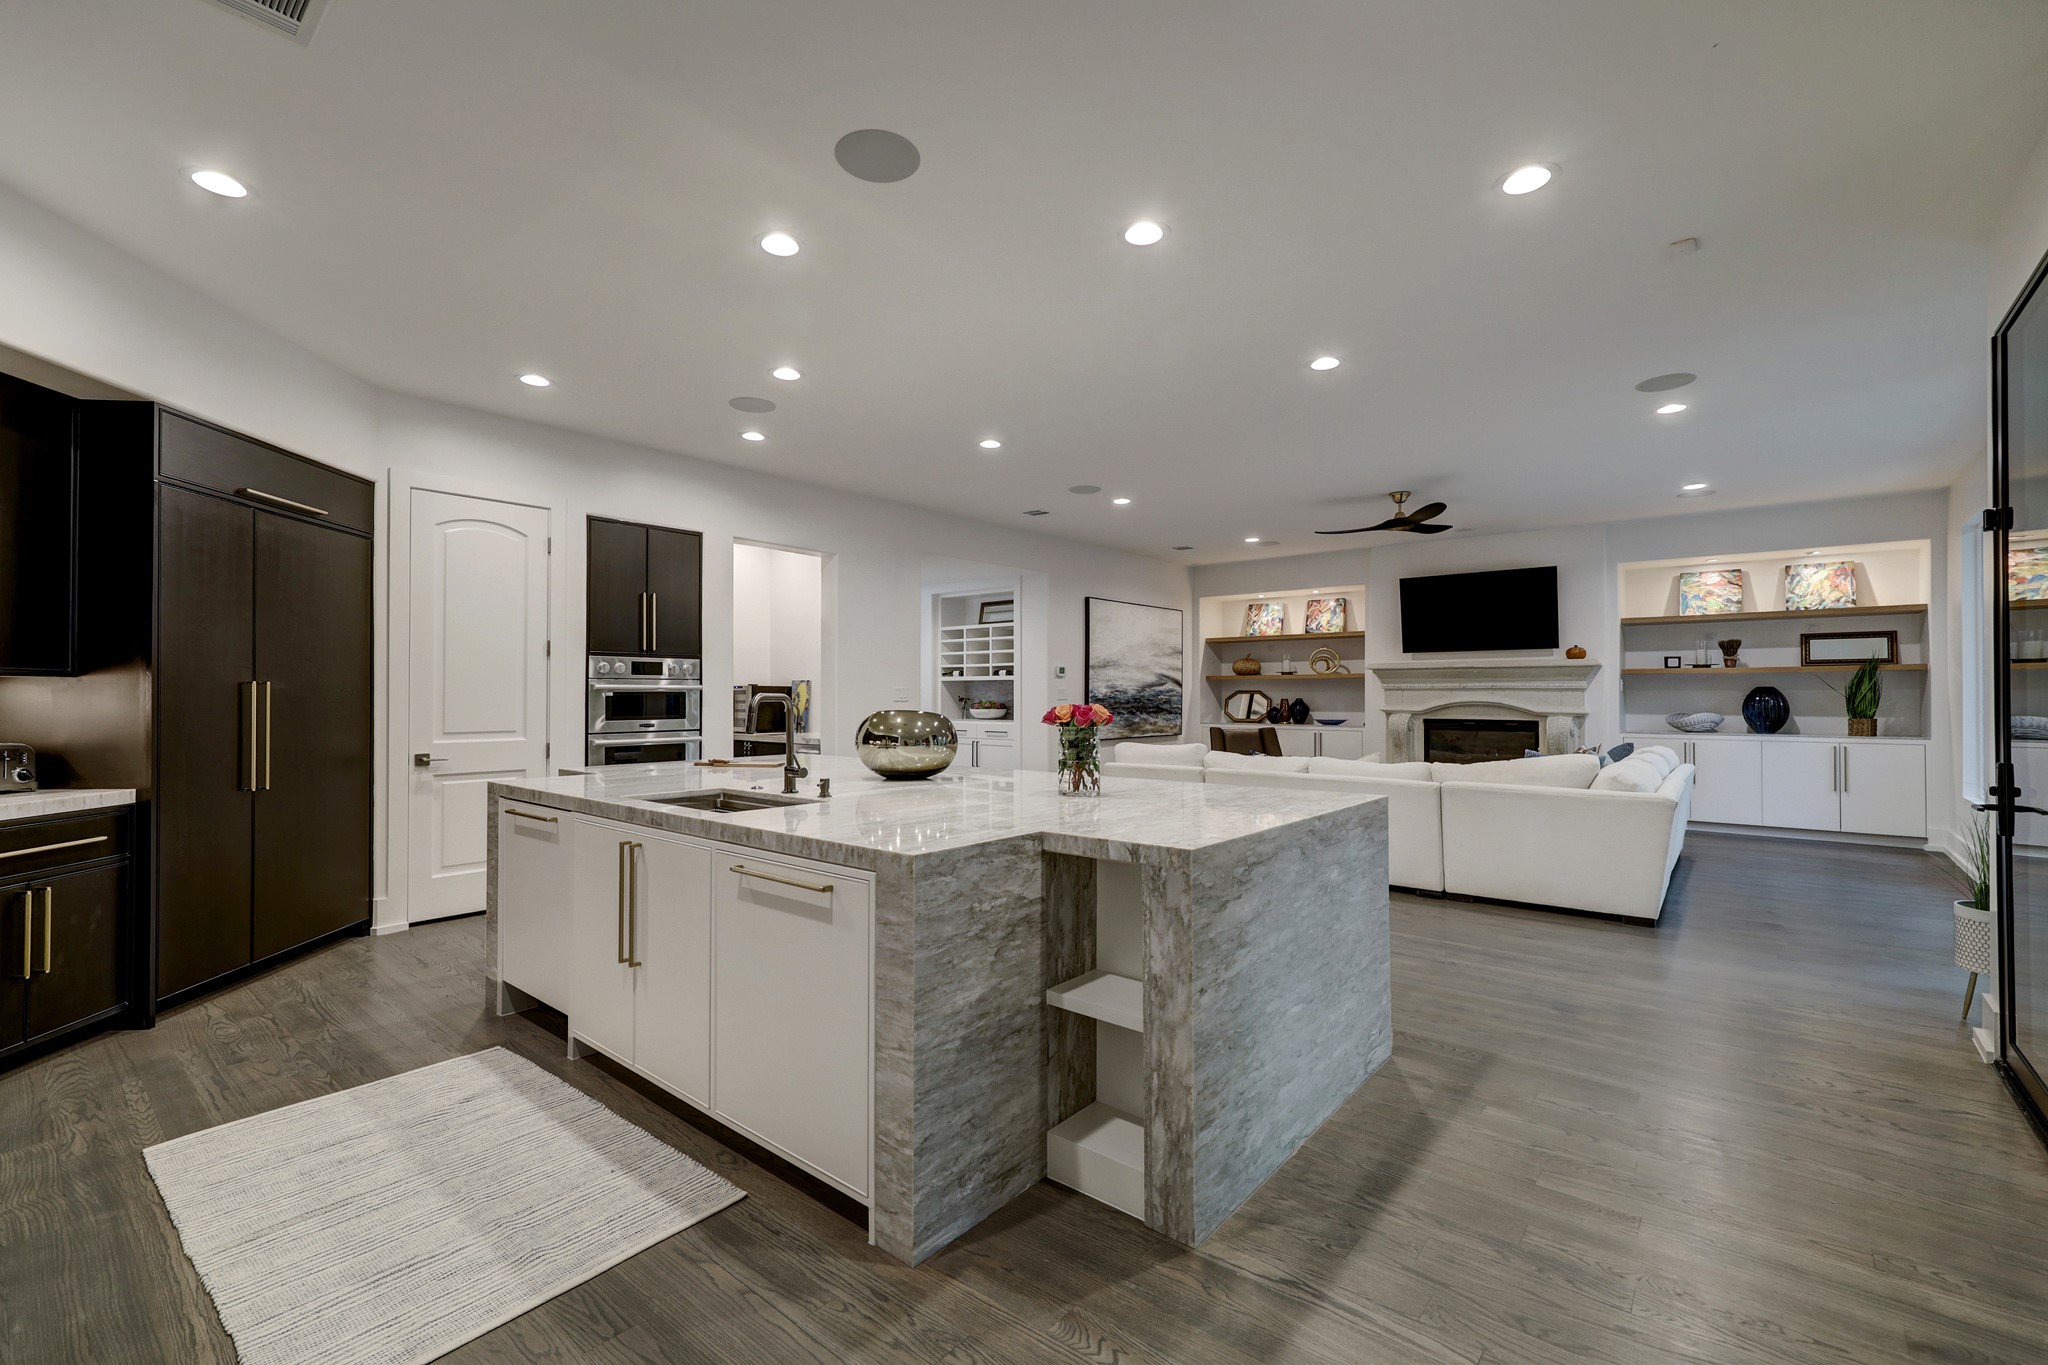 Totally reconfigured kitchen with custom, high end cabinetry with built in refrigerator opens to the den and over looks the tranquil backyard.